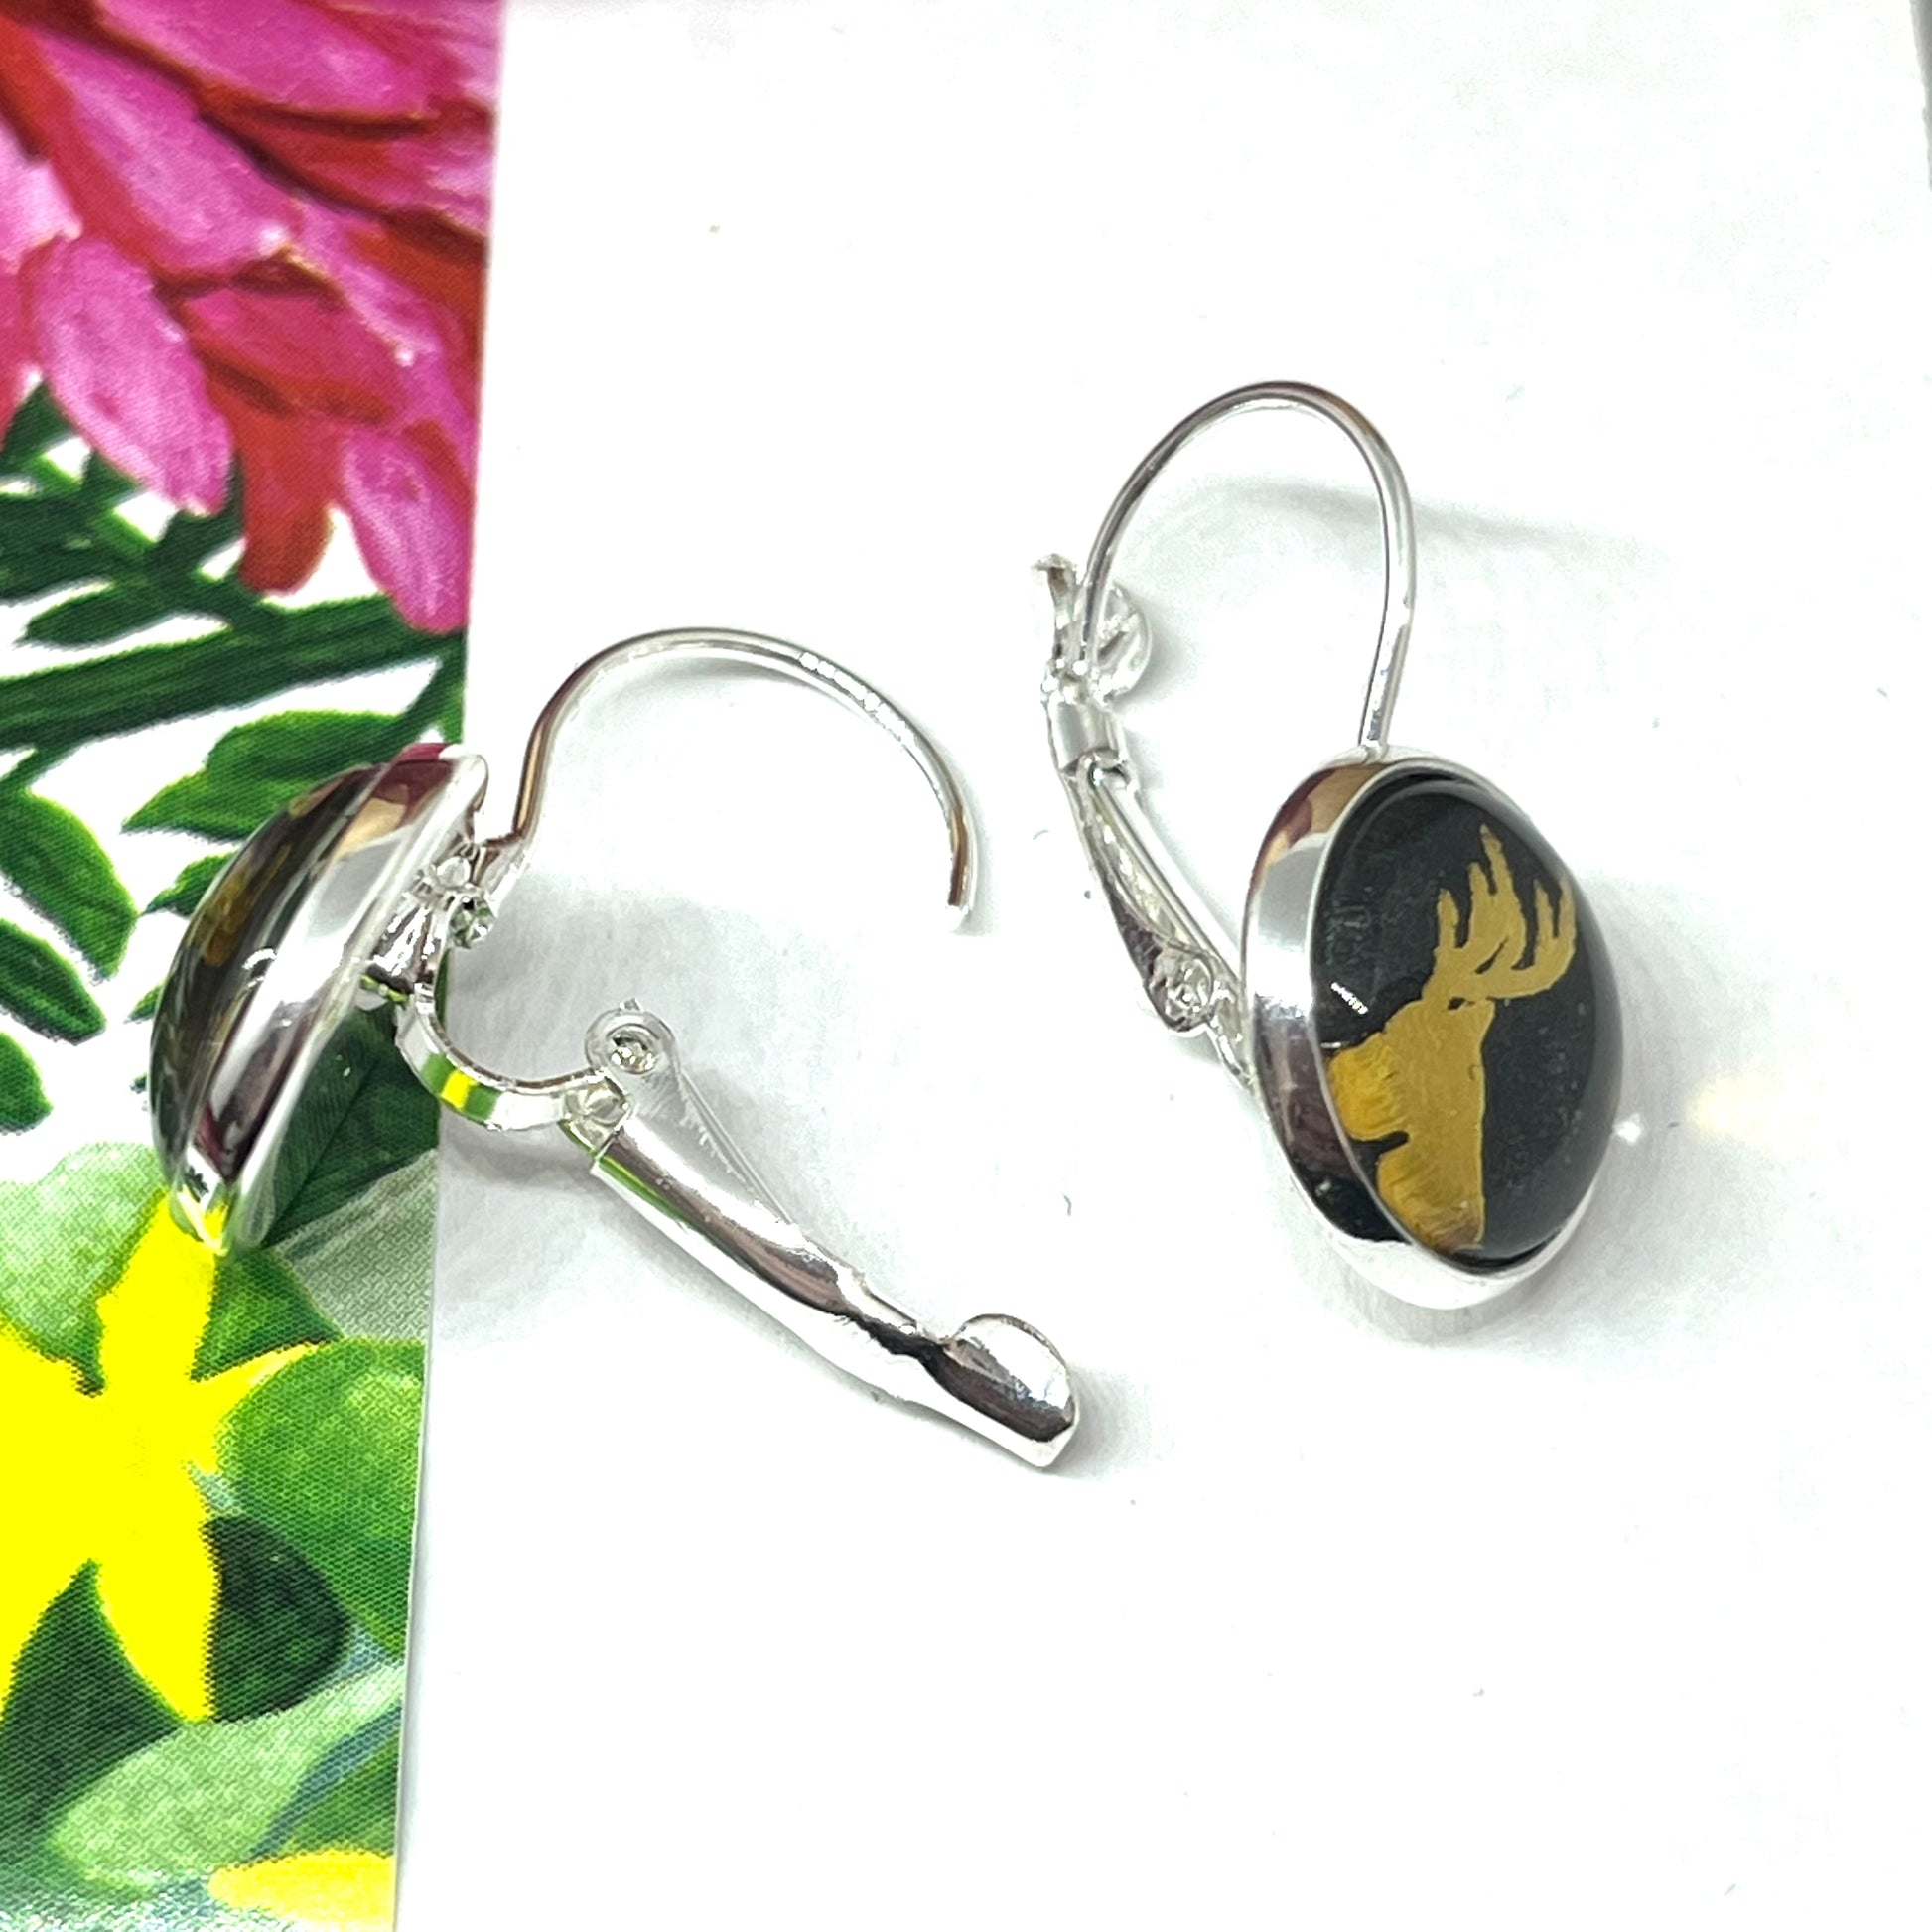 Black and gold glass dome reindeer christmas earrings showing the open clasp.